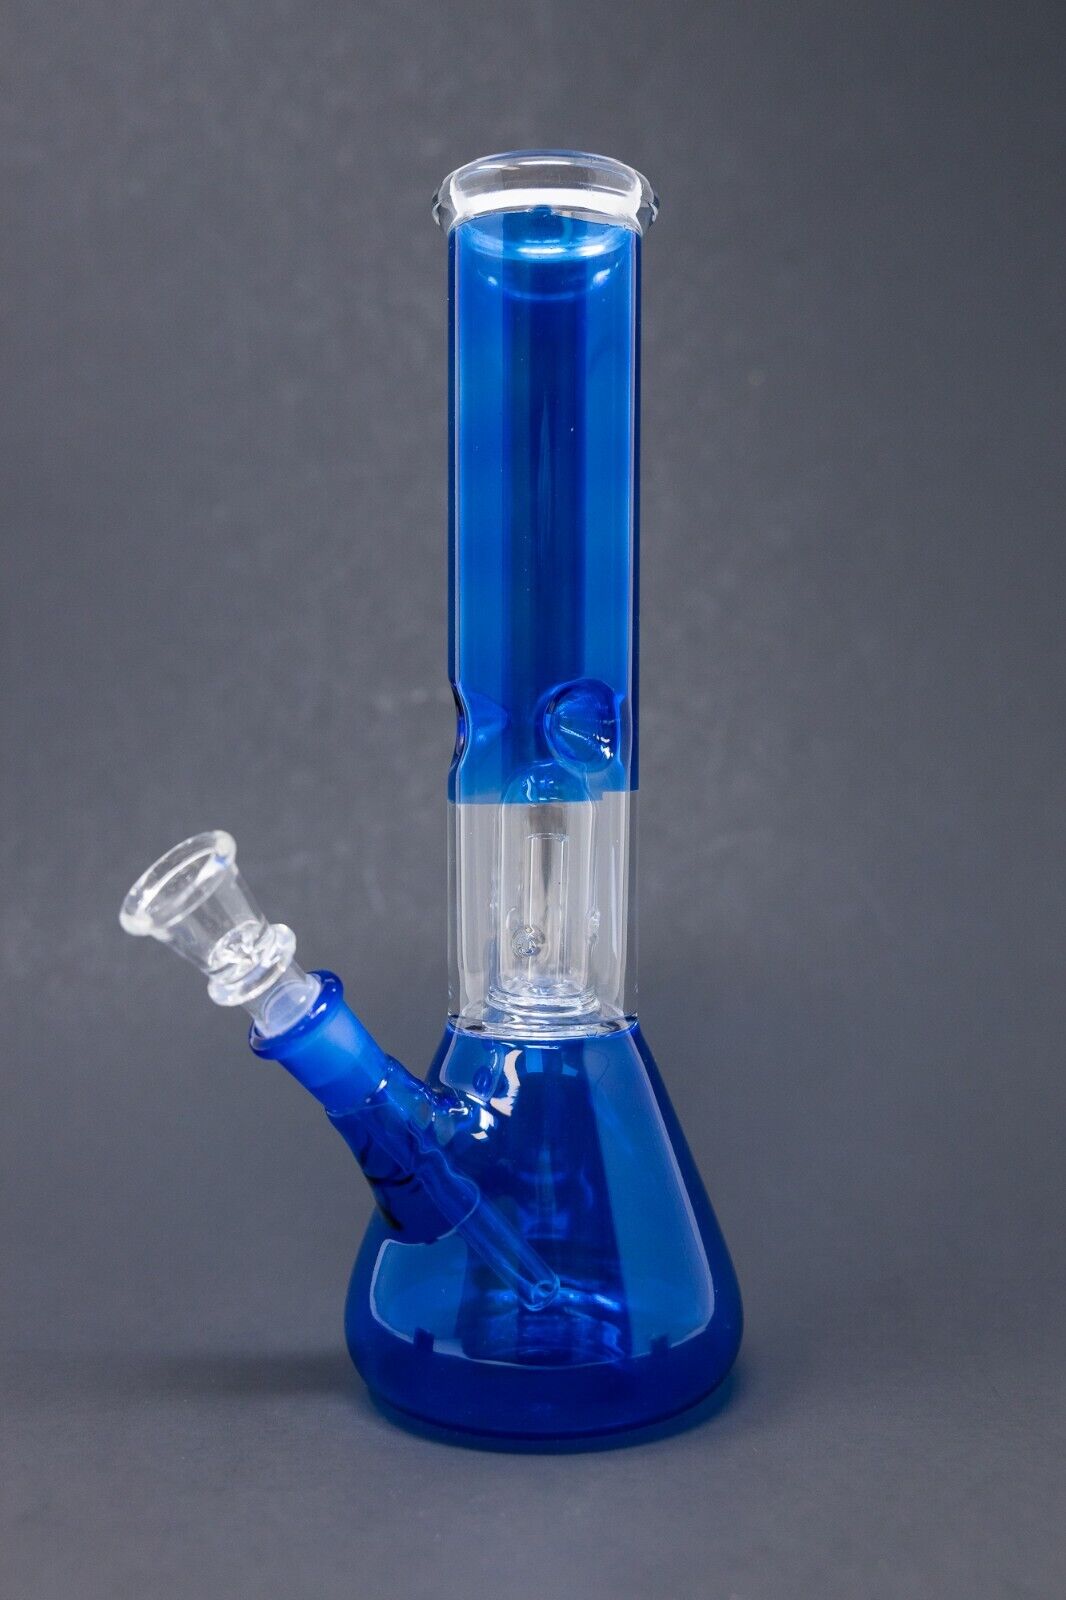 Hookah Water Pipe Glass 10 Blue Single Percolator Beaker Tobacco Bong. Available Now for 19.99